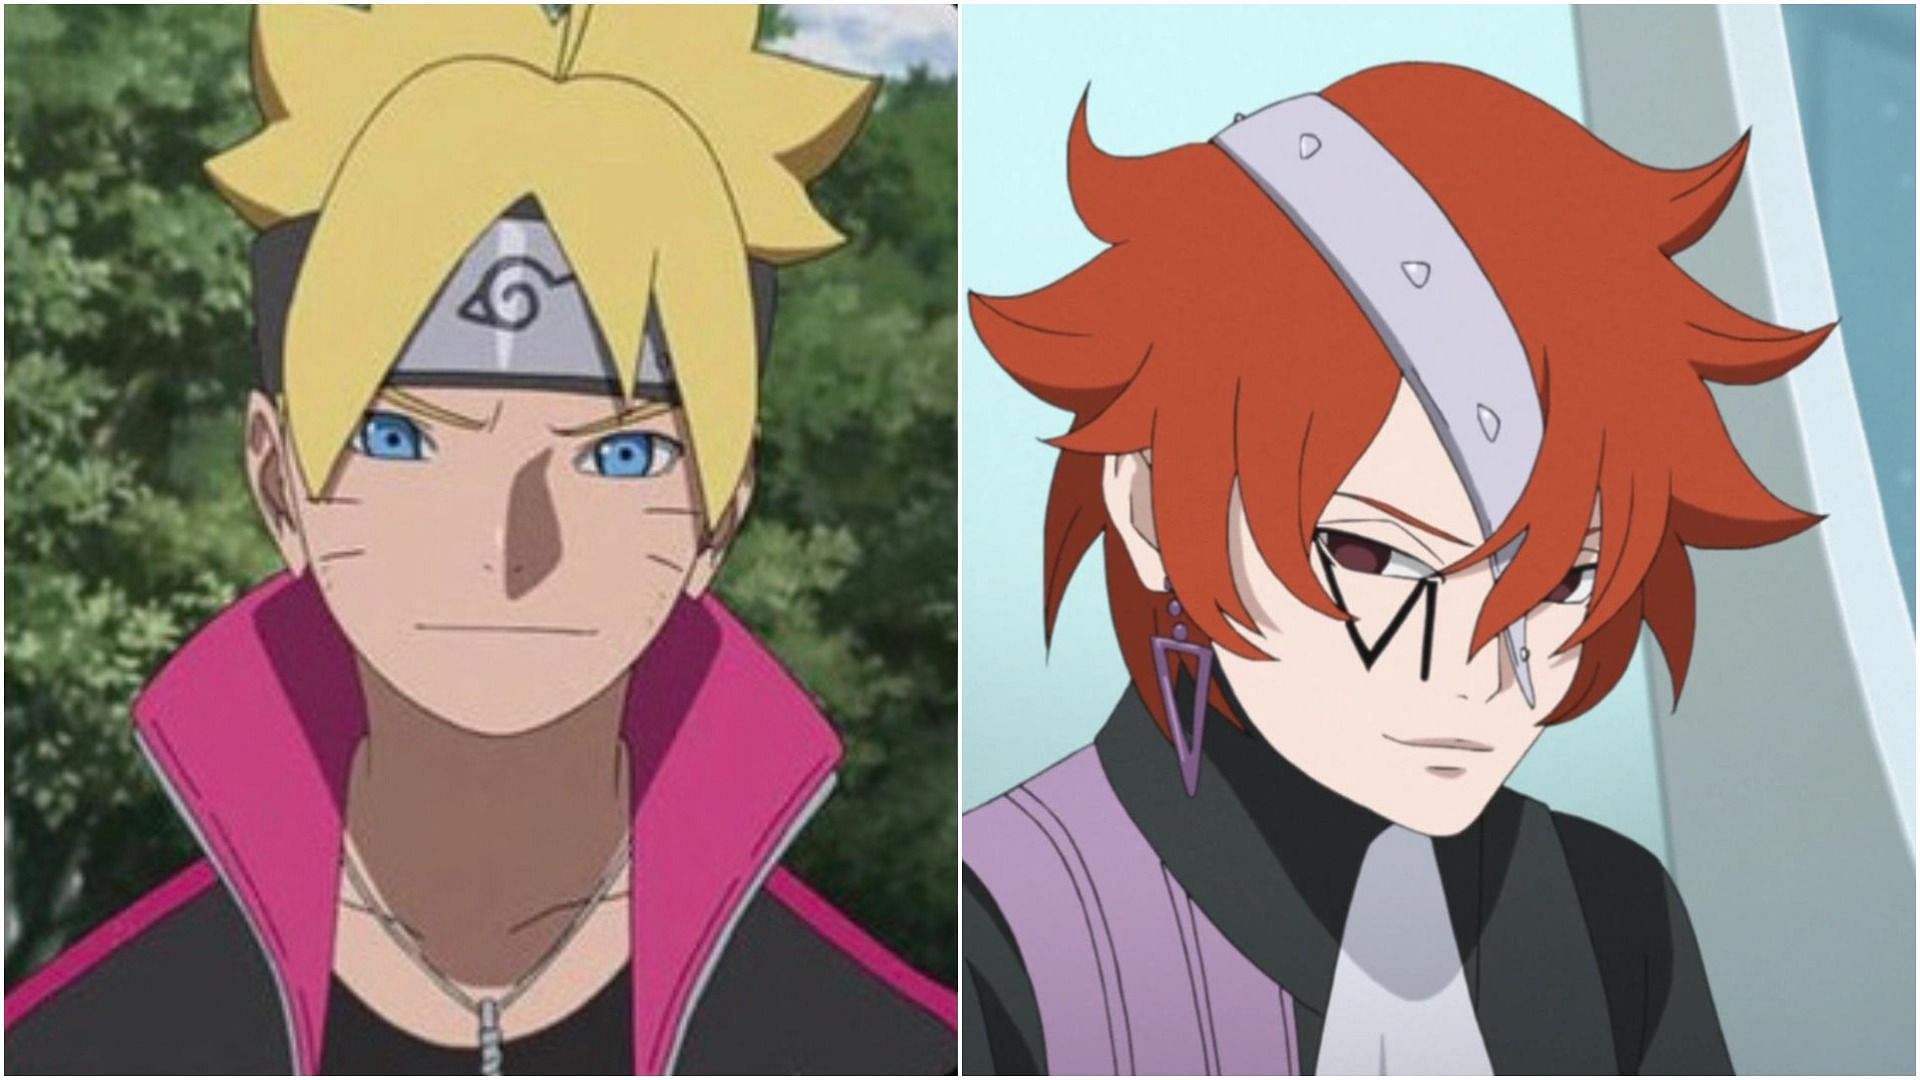 Boruto might leave with Code and become a rogue ninja, suggests new theory (Images via Reddit thread r/Boruto)